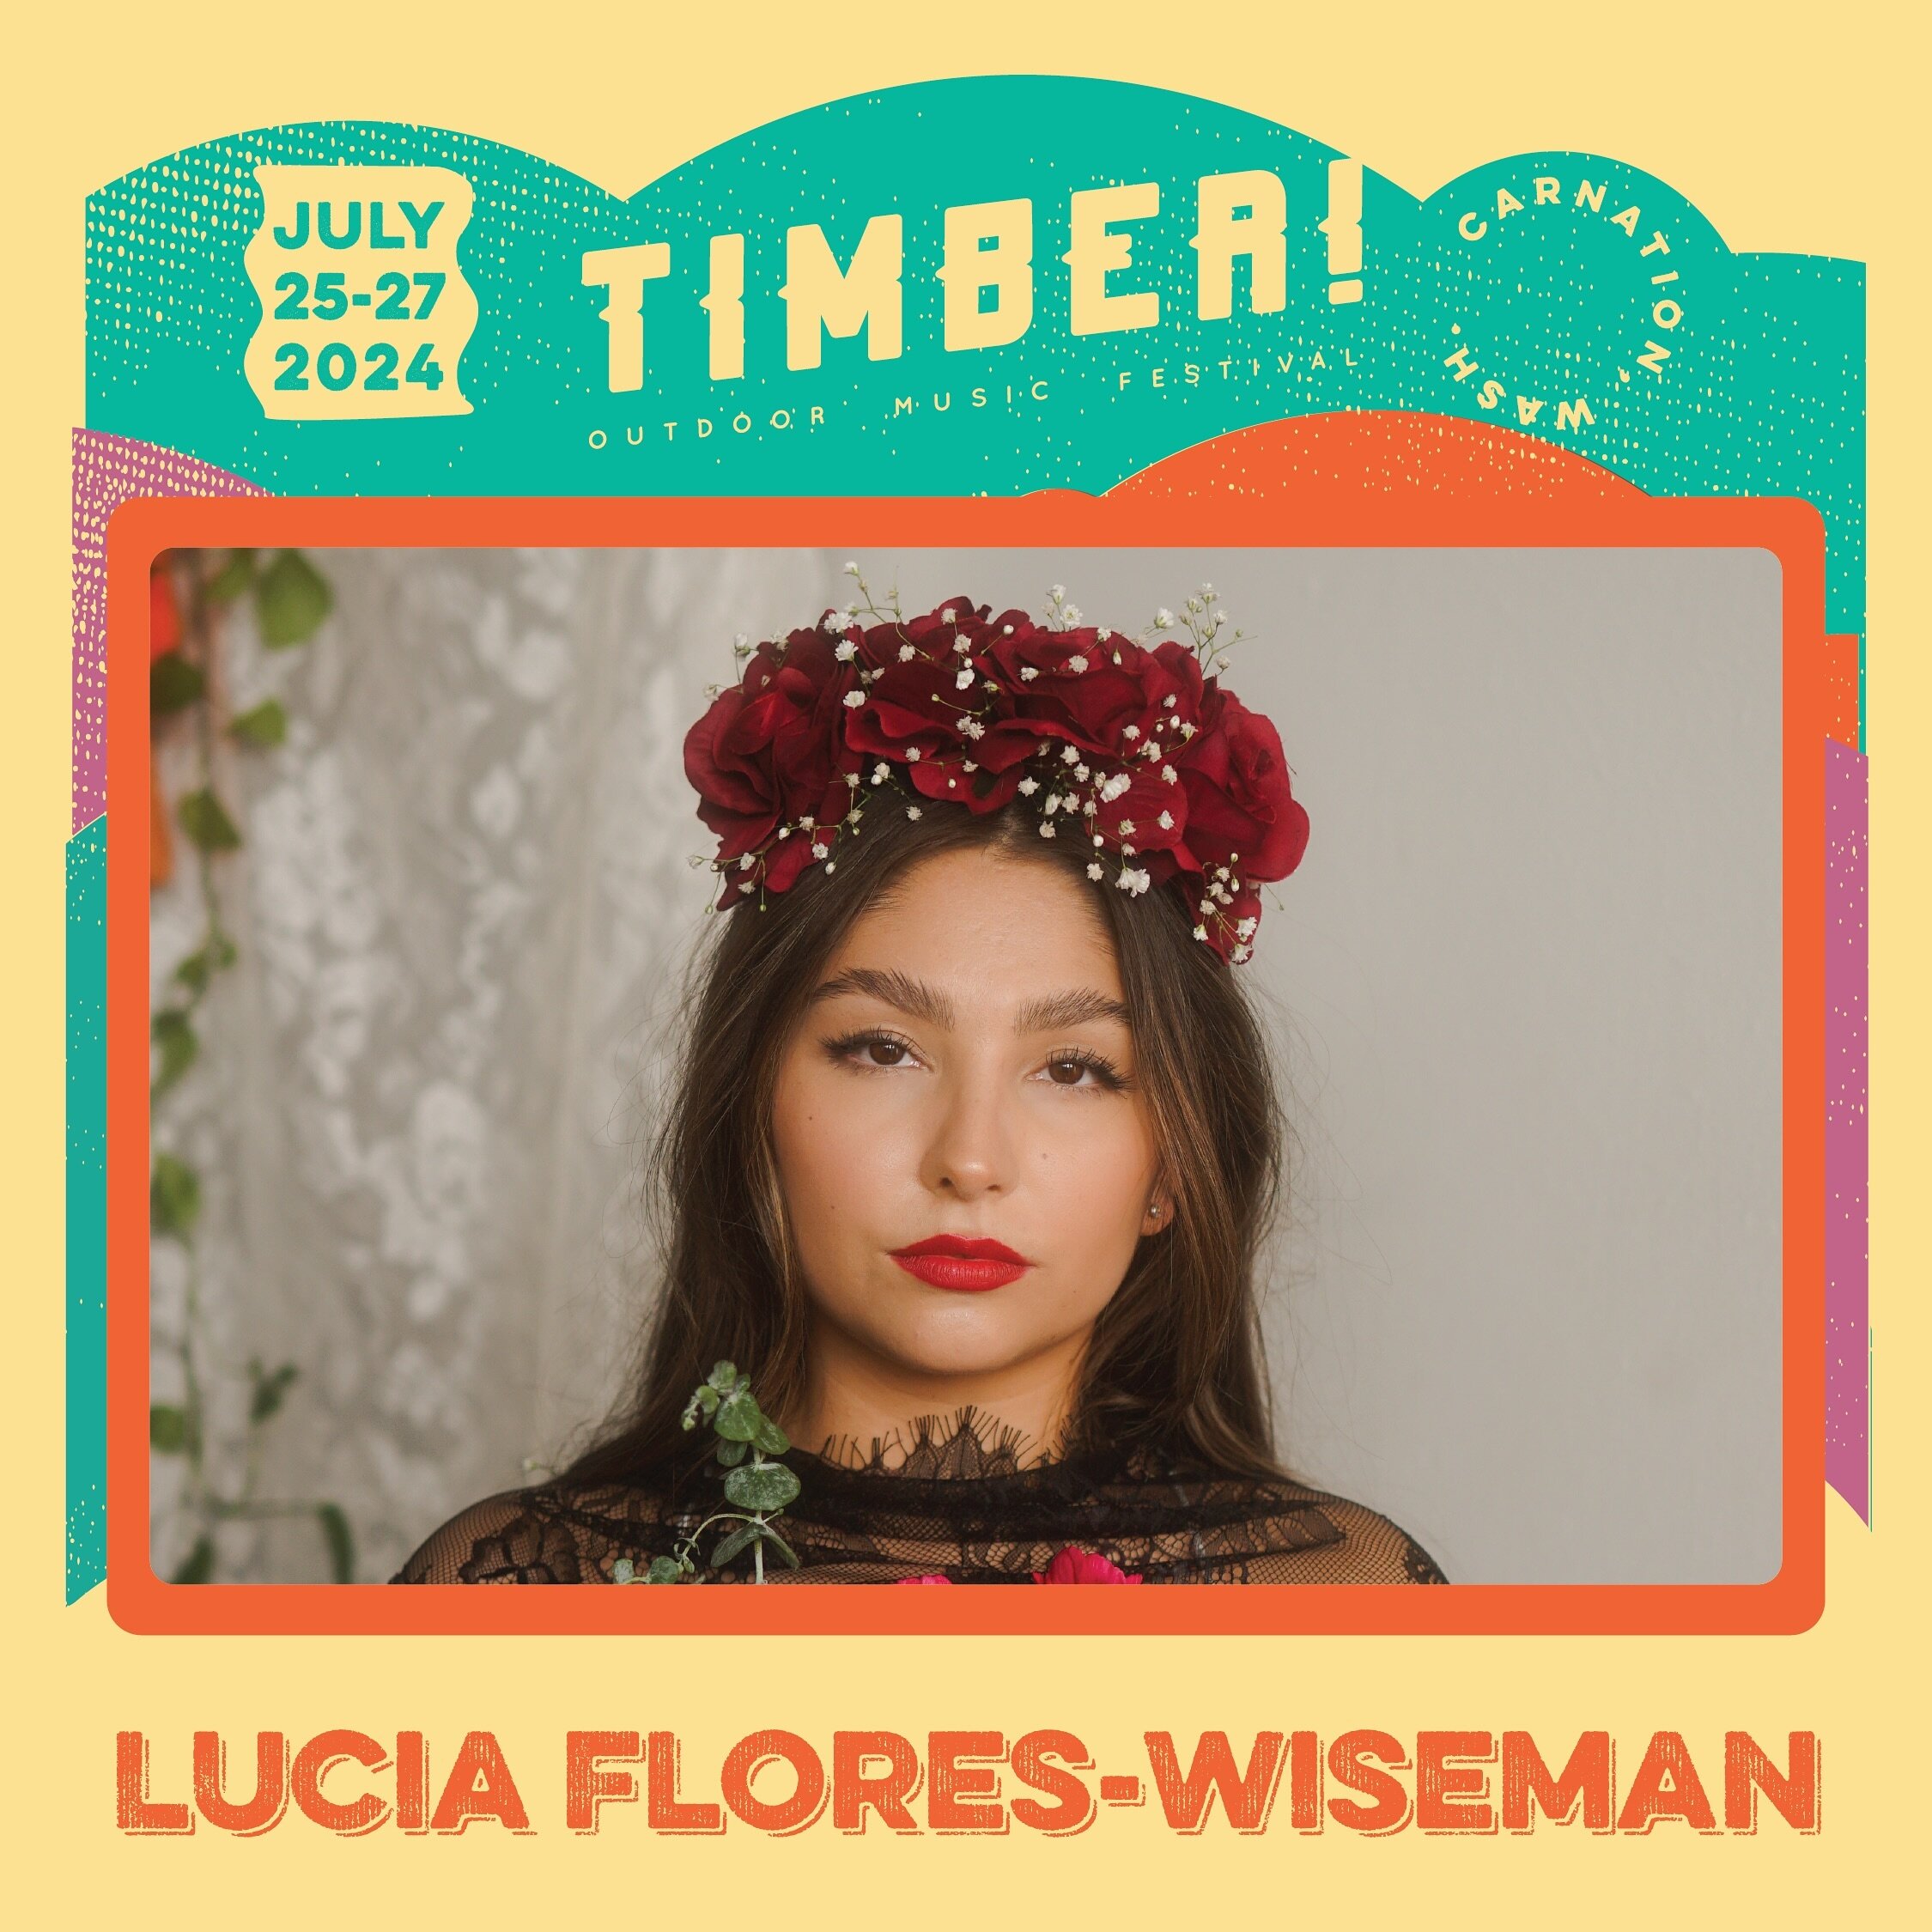 See you at @timberfest , coming up this summer, July 25-27, in Carnation, WA! Tickets are on sale now at bit.ly/timberfesttix. It&rsquo;s about to be the best summer yet. #timberfest ☀️
-
-
-
#seattle #washington #musicfestival #seattlemusicians #sea